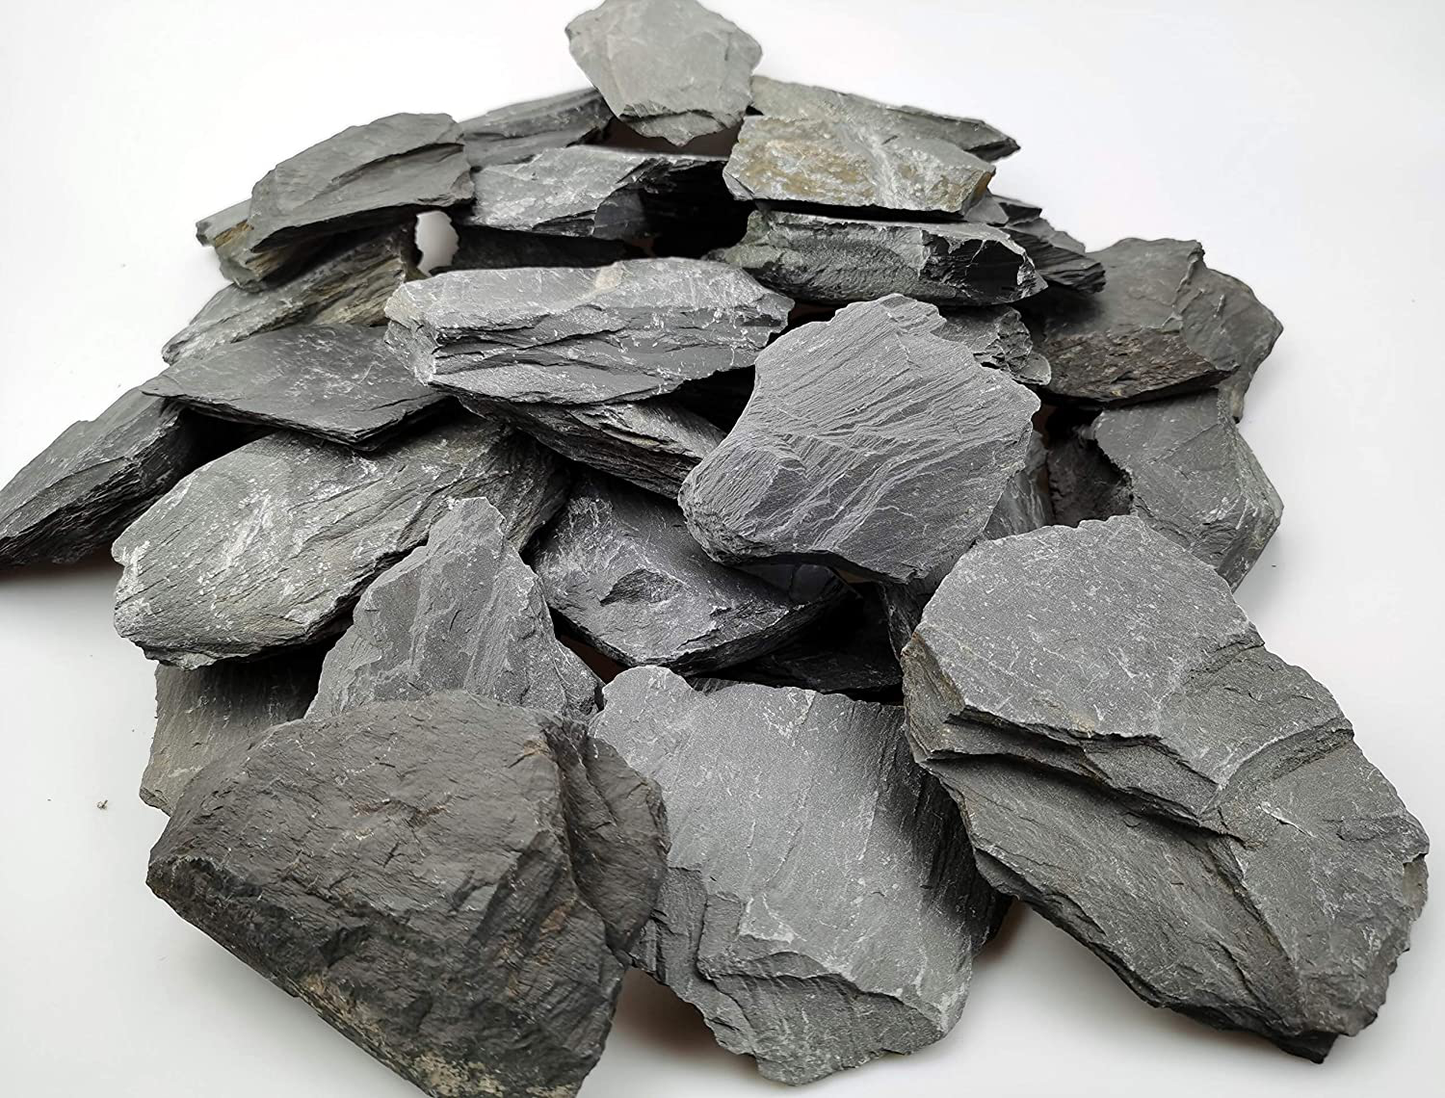 Voulosimi Natural Slate Rocks Stone Perfect Rocks Seiryu Rock for Aquariums, Landscaping Model,Amphibian Enclosures Animals & Pet Supplies > Pet Supplies > Fish Supplies > Aquarium Decor Voulosimi 10 Pound Slate 1-3in  